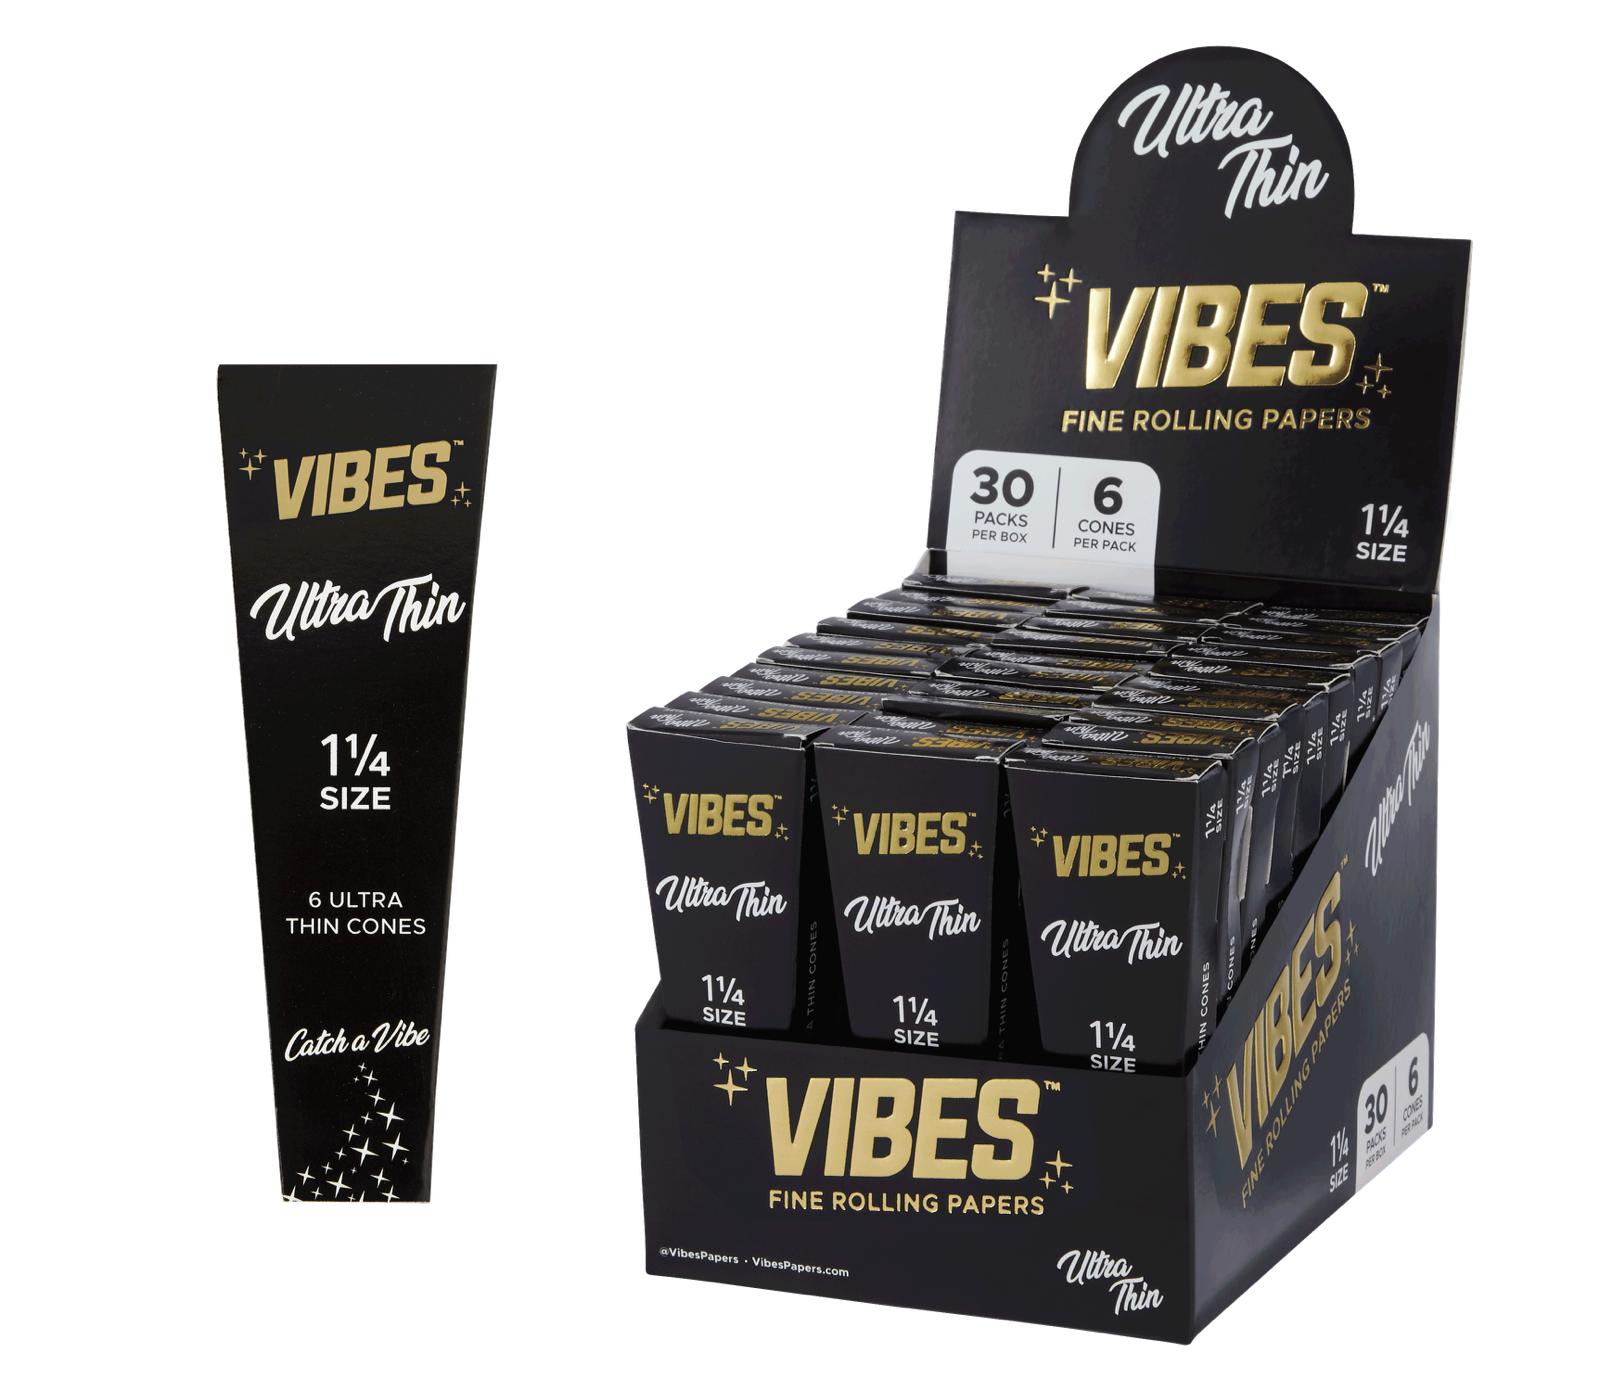 Vibes Ultra Thin 1 1/4" Size Cones